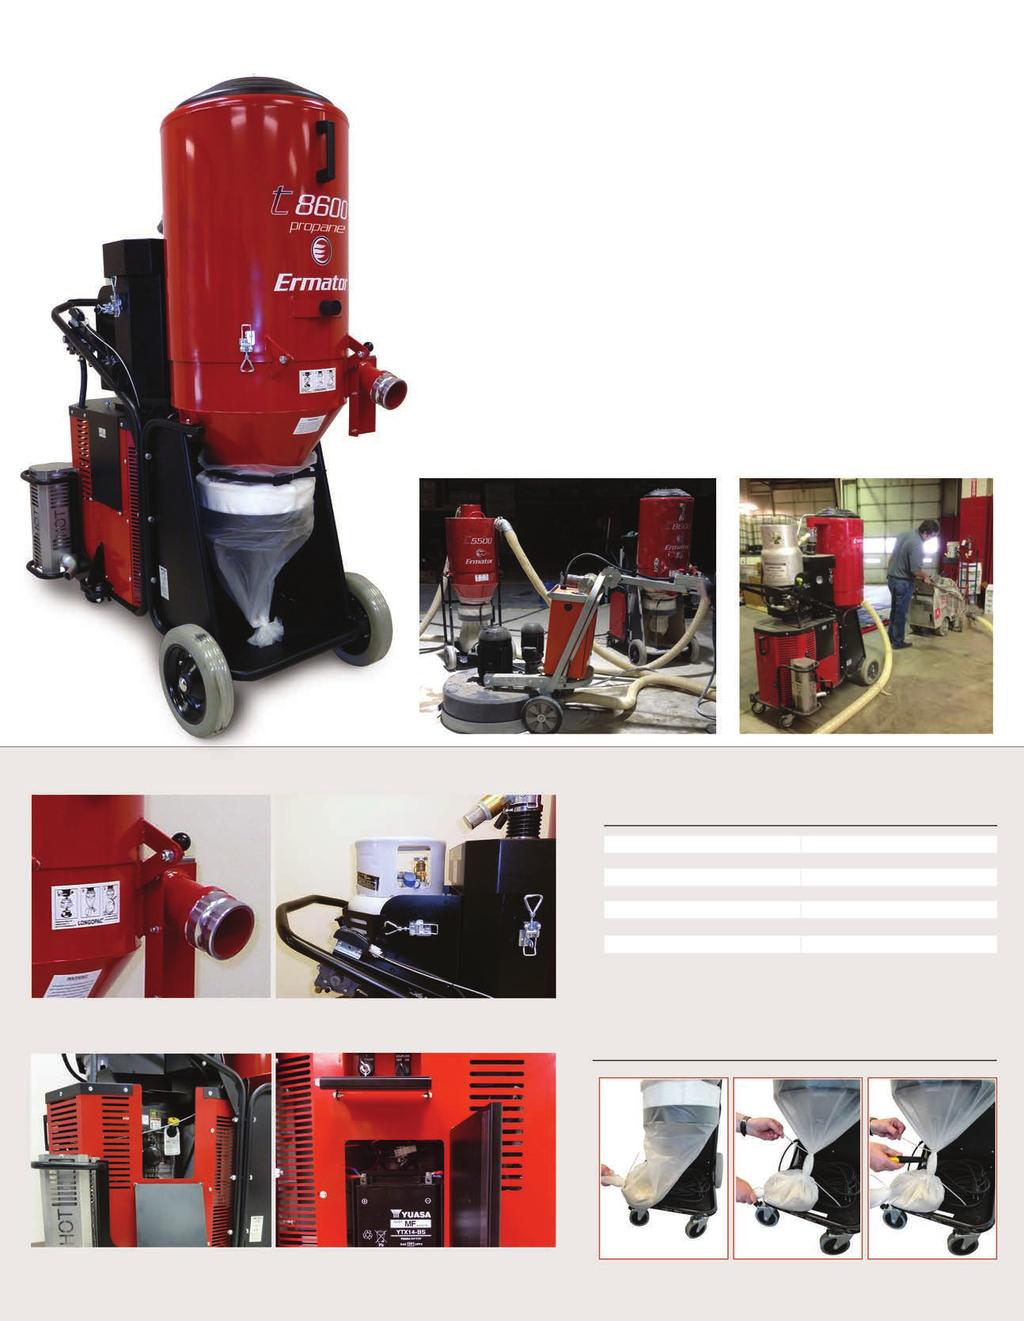 T8600 Propane HEPA Dust Extractor Creating Clean Air for Construction, Abatement, and Restoration With 18HP, 410 CFM and a 115 water lift the T8600 Propane is the strongest and safest propane vacuum